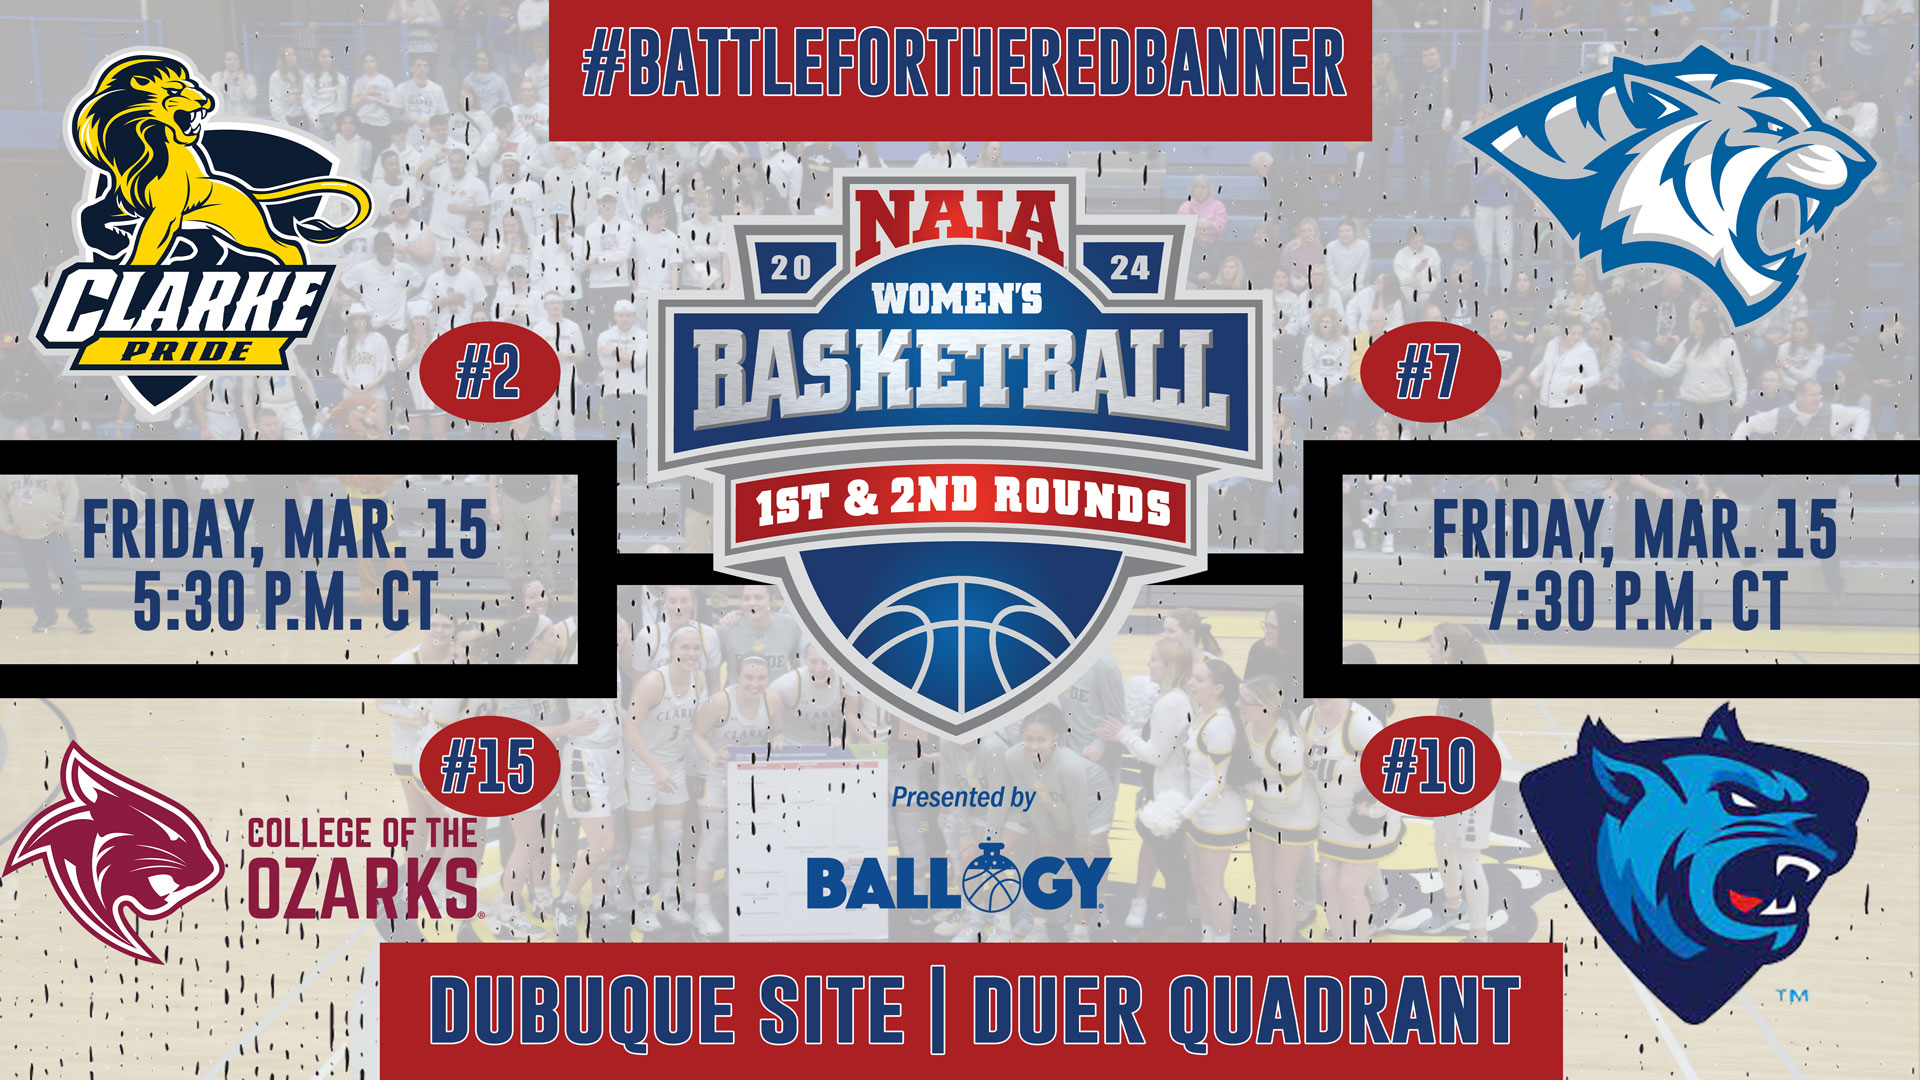 Full NAIA Women’s Basketball Tournament Field Announced, Clarke to Host Dakota Wesleyan, Rust, and College of the Ozarks as part of Duer Quadrant